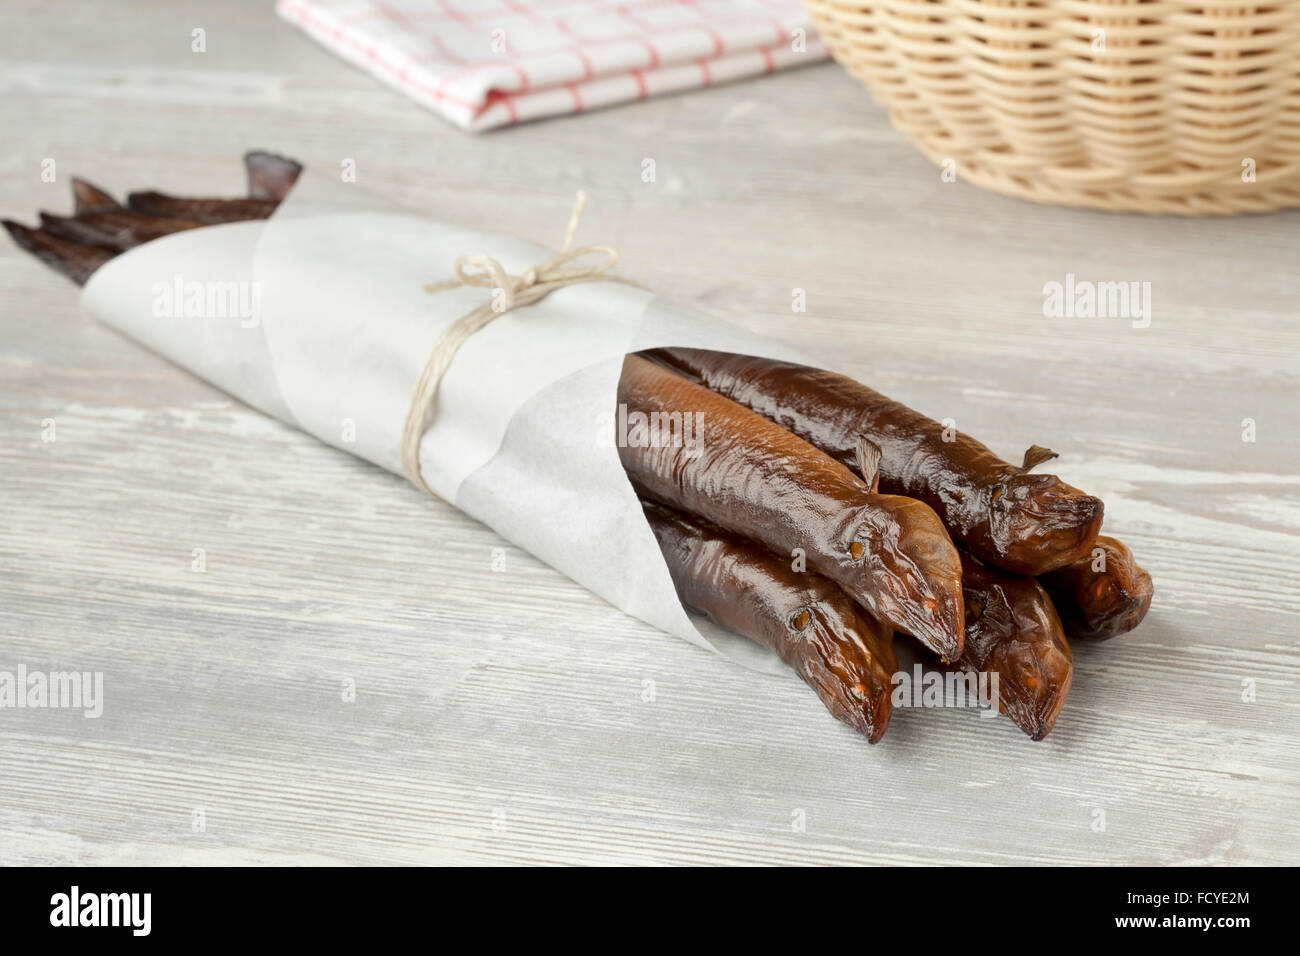 Bunch of smoked eels wrapped in paper Stock Photo